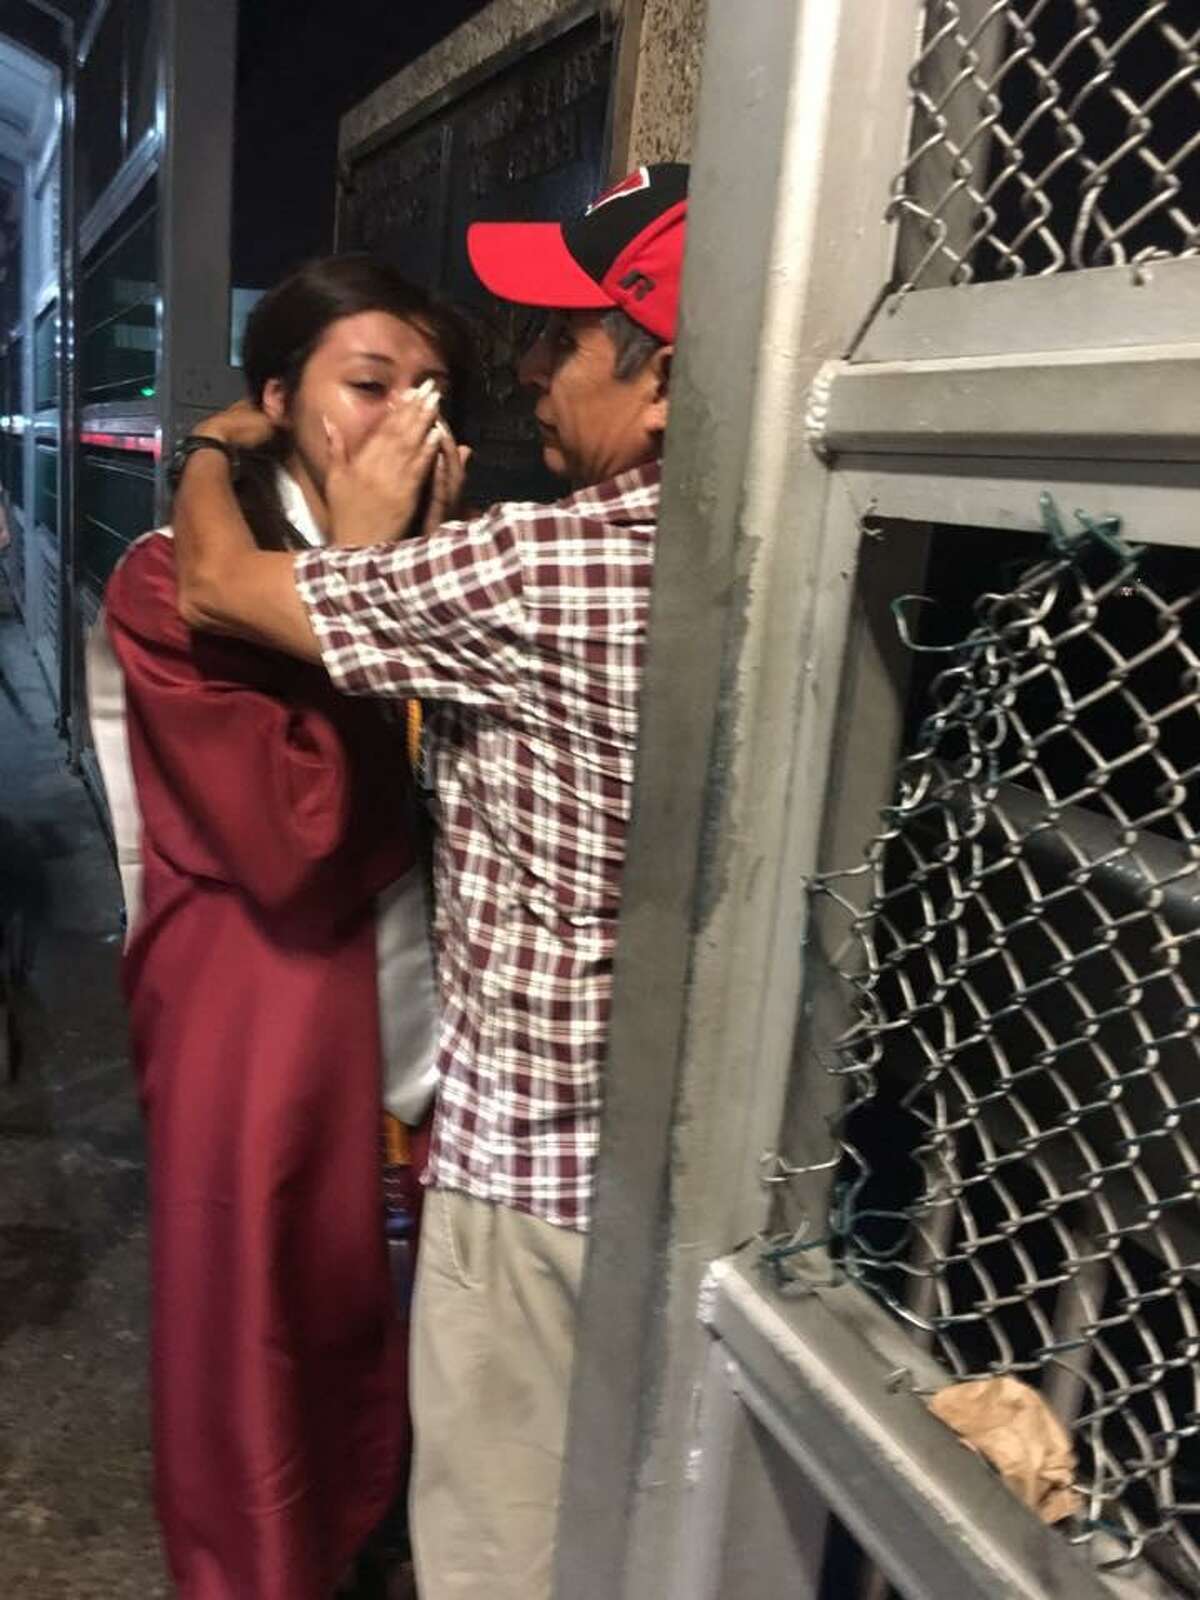 Saraí Ruiz meets her father, Esteban Ruiz, in the middle of the international bridge after her graduation from Hector J. Garcia Early College High School.